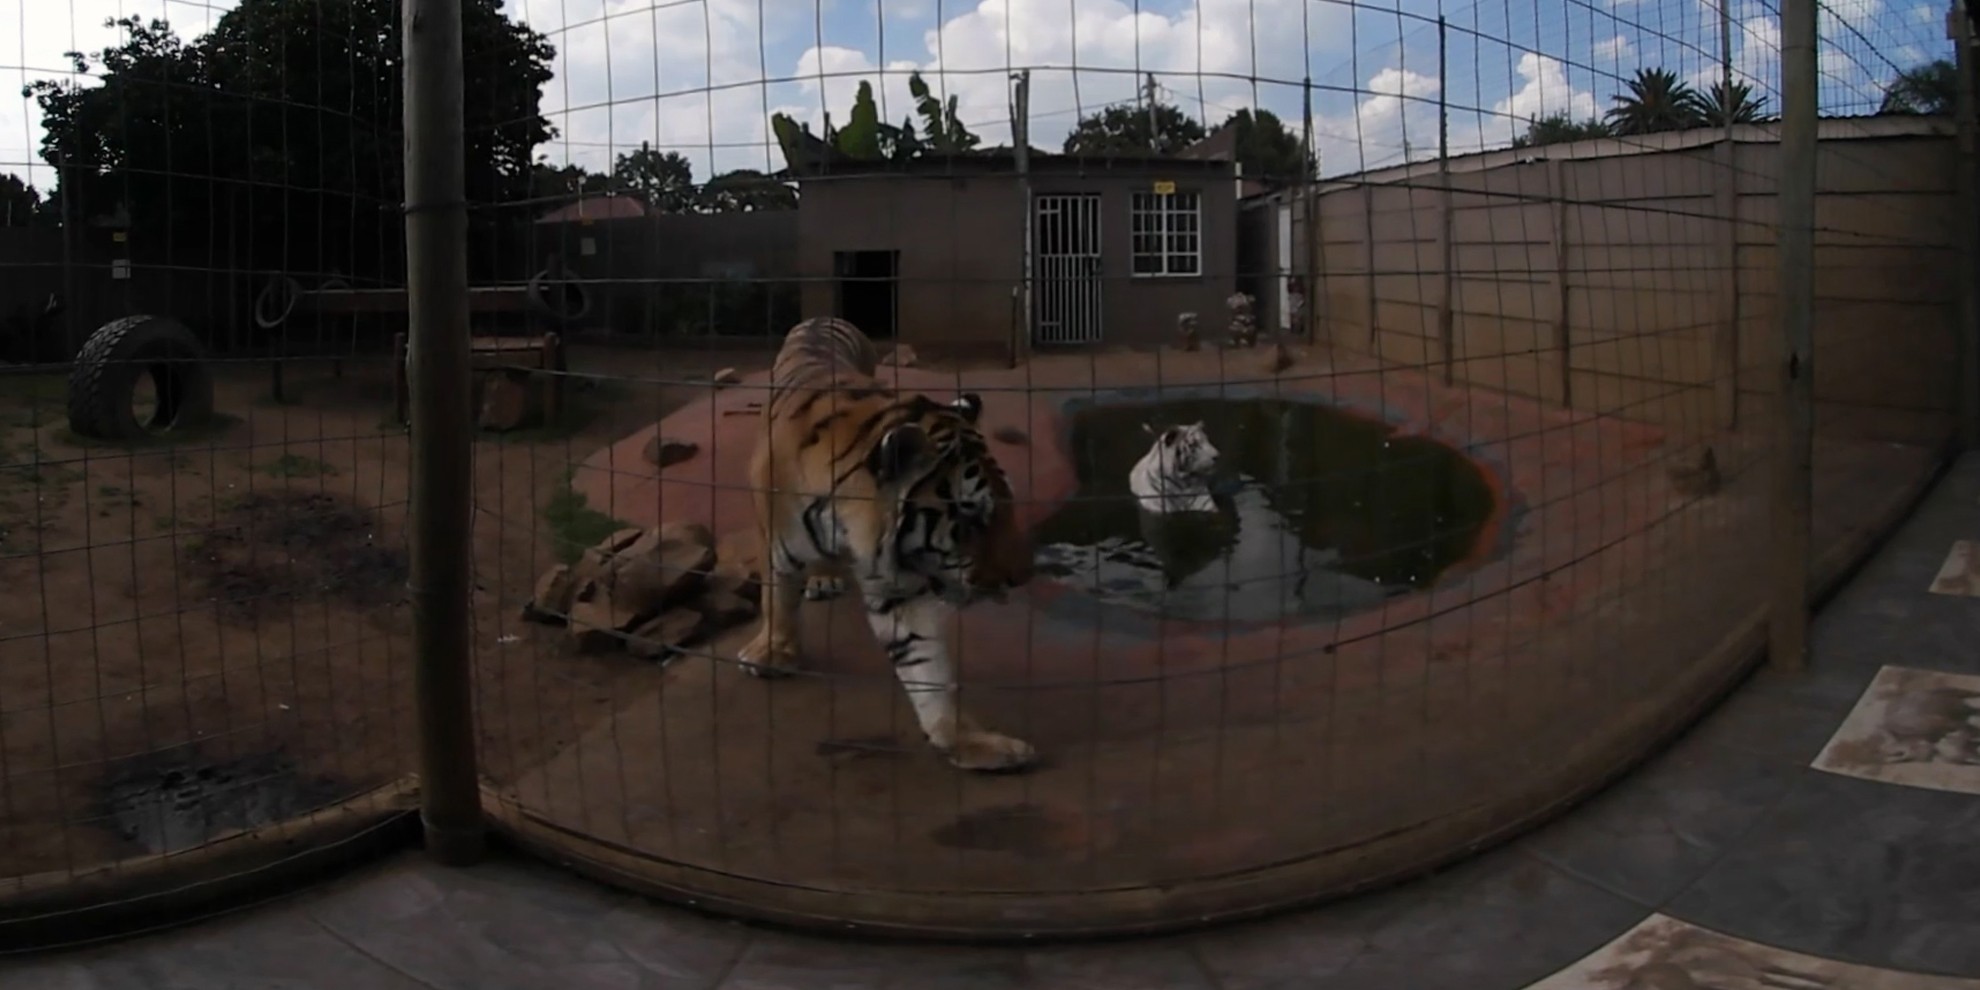 360 Video Tigers in South Africa